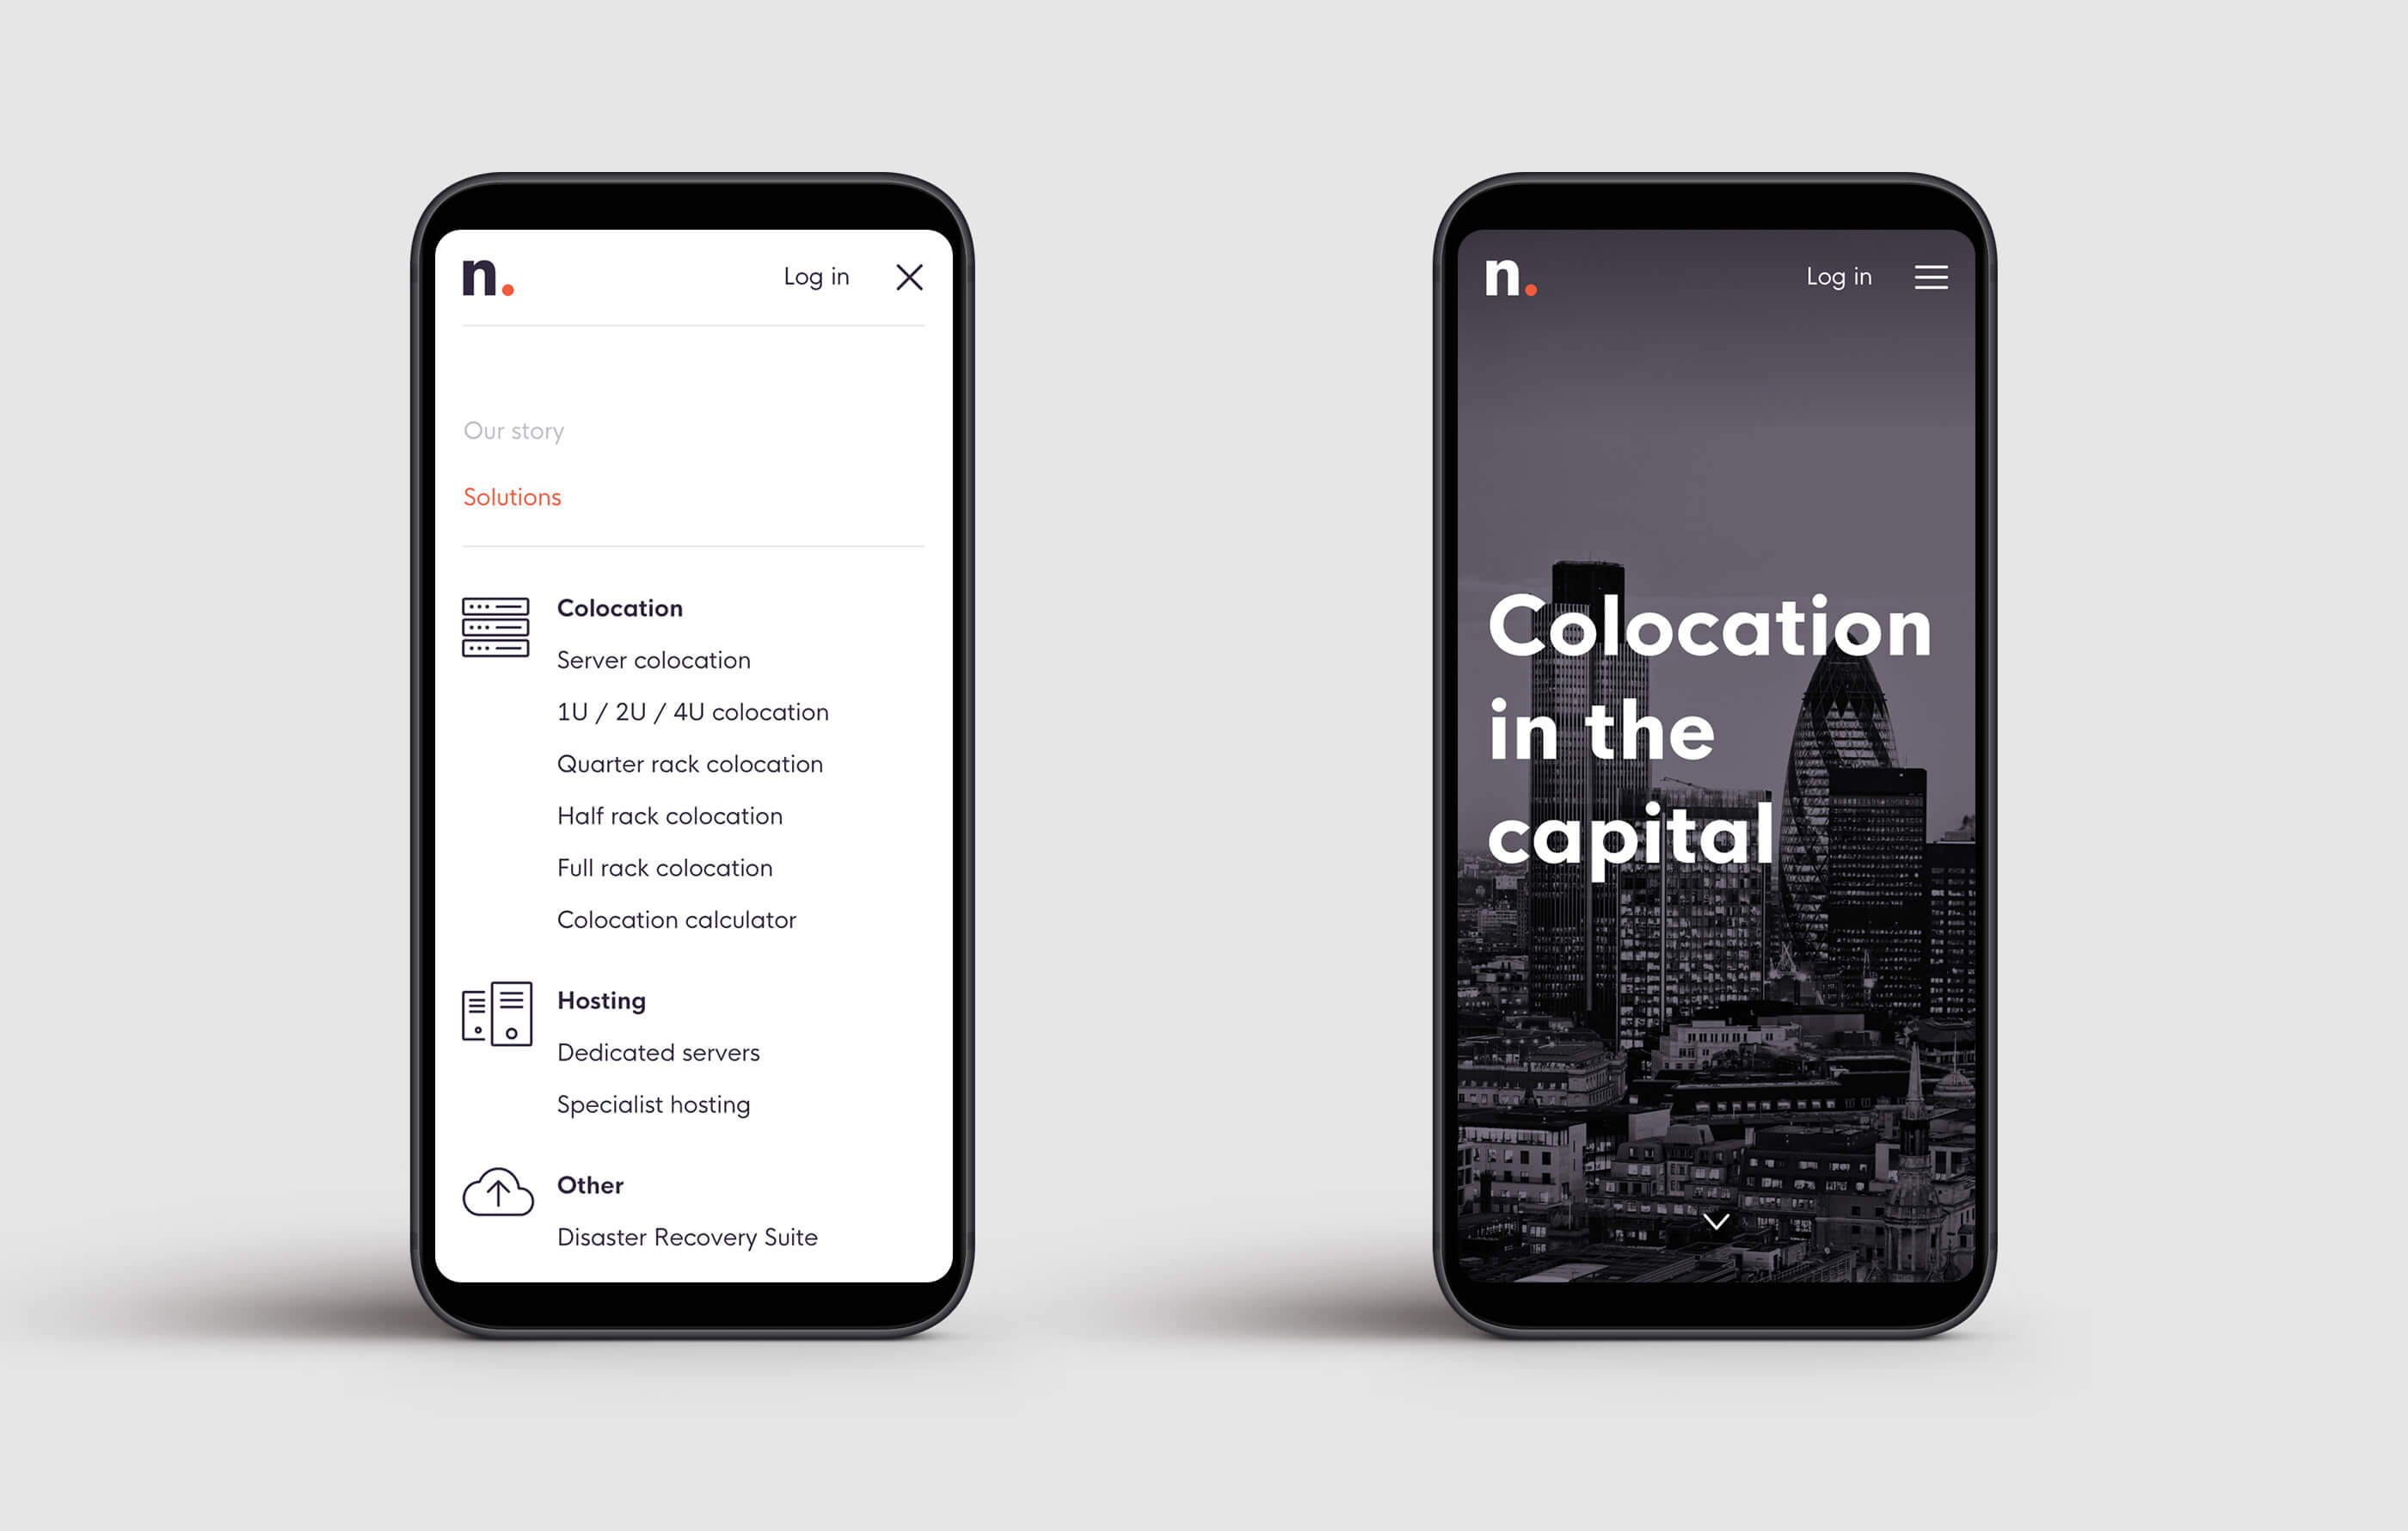 Two mobile phone mockups of the mobile navigation and homepage designs, featuring icons of the various solutions and 'Colocation in the Capital' hero